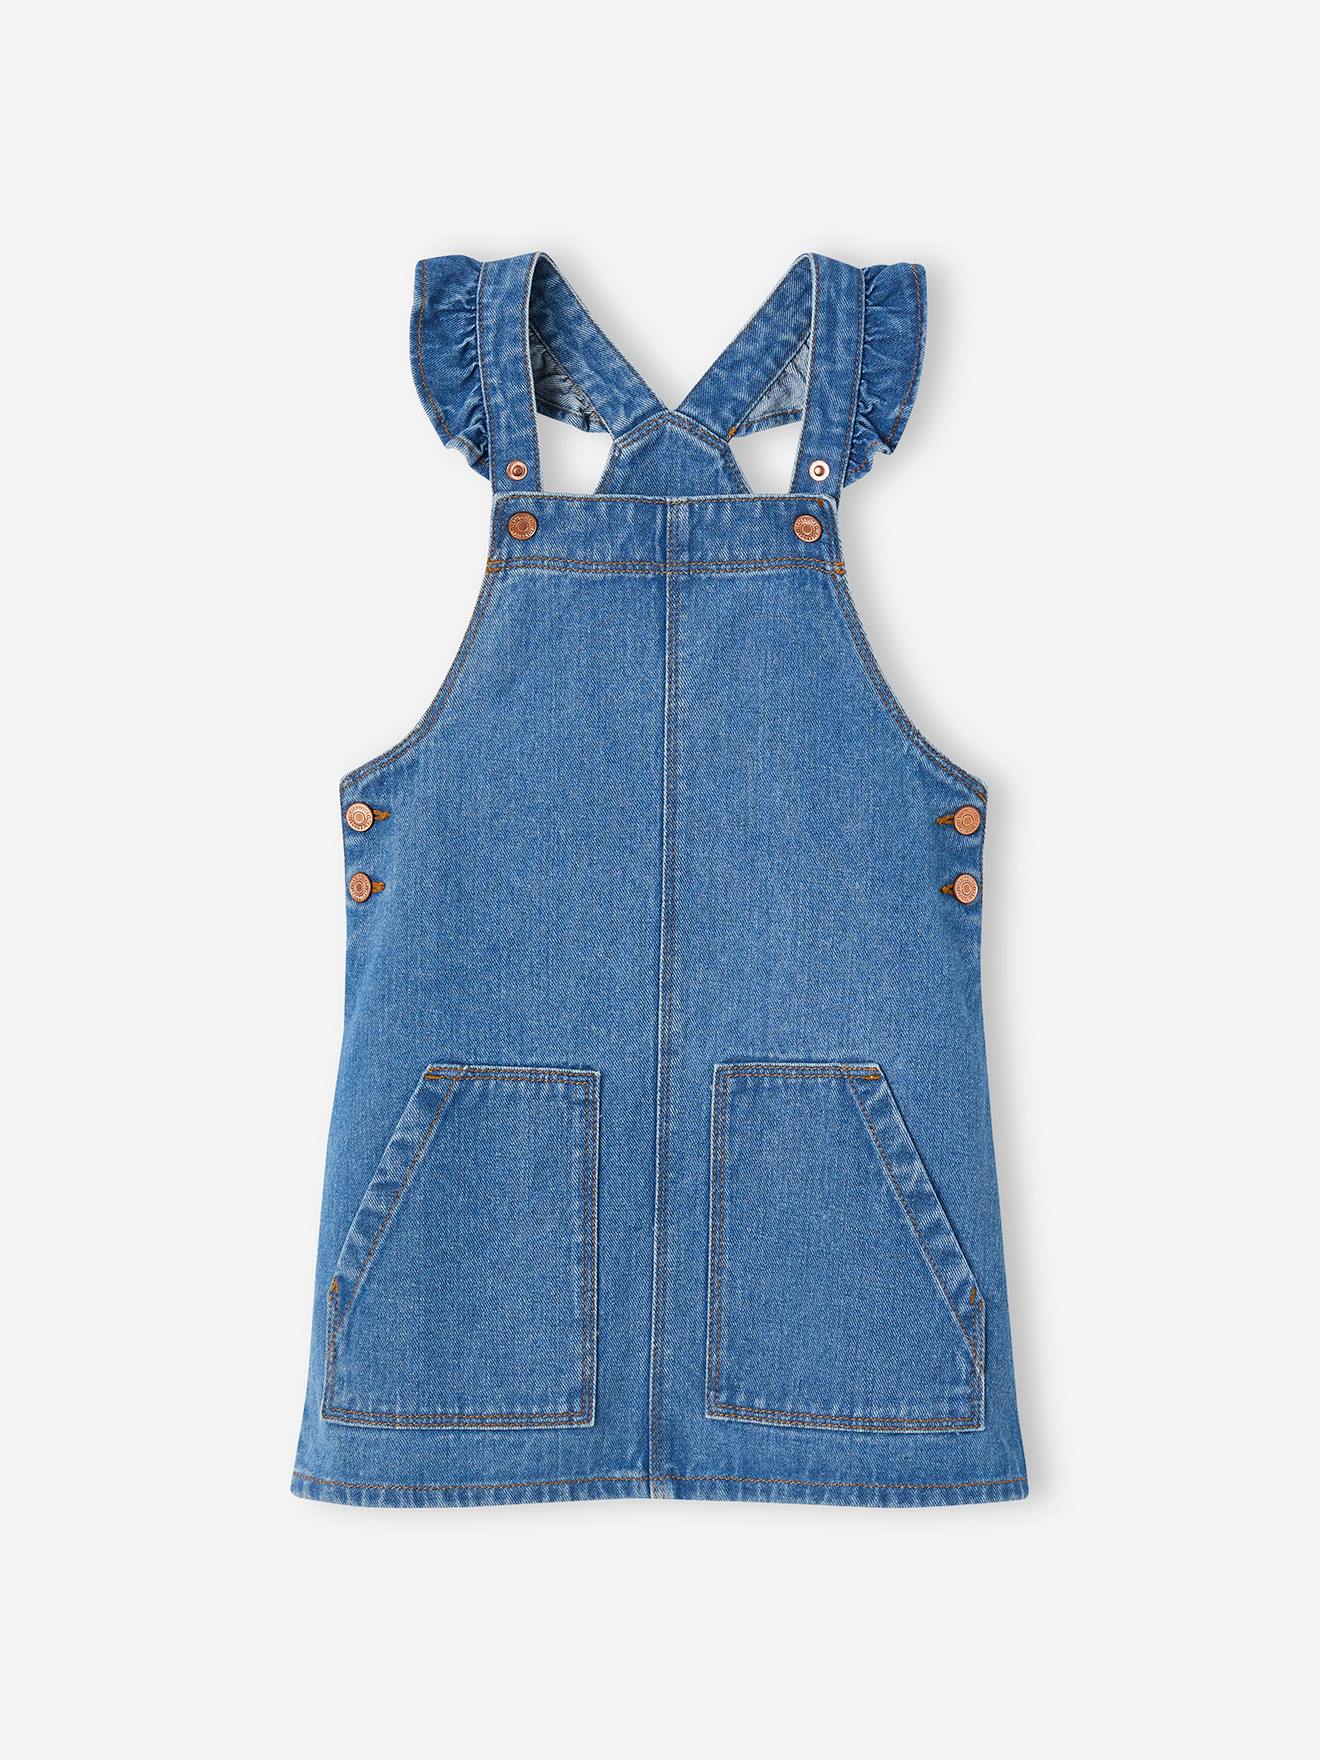 Bedazzle Plain / Solid Denim Knee Length Dungaree-Dress for Women Set Of 6,  TLDGRZ0WPCKWD9XCL34LN0GRGX1RSYT | Udaan - B2B Buying for Retailers